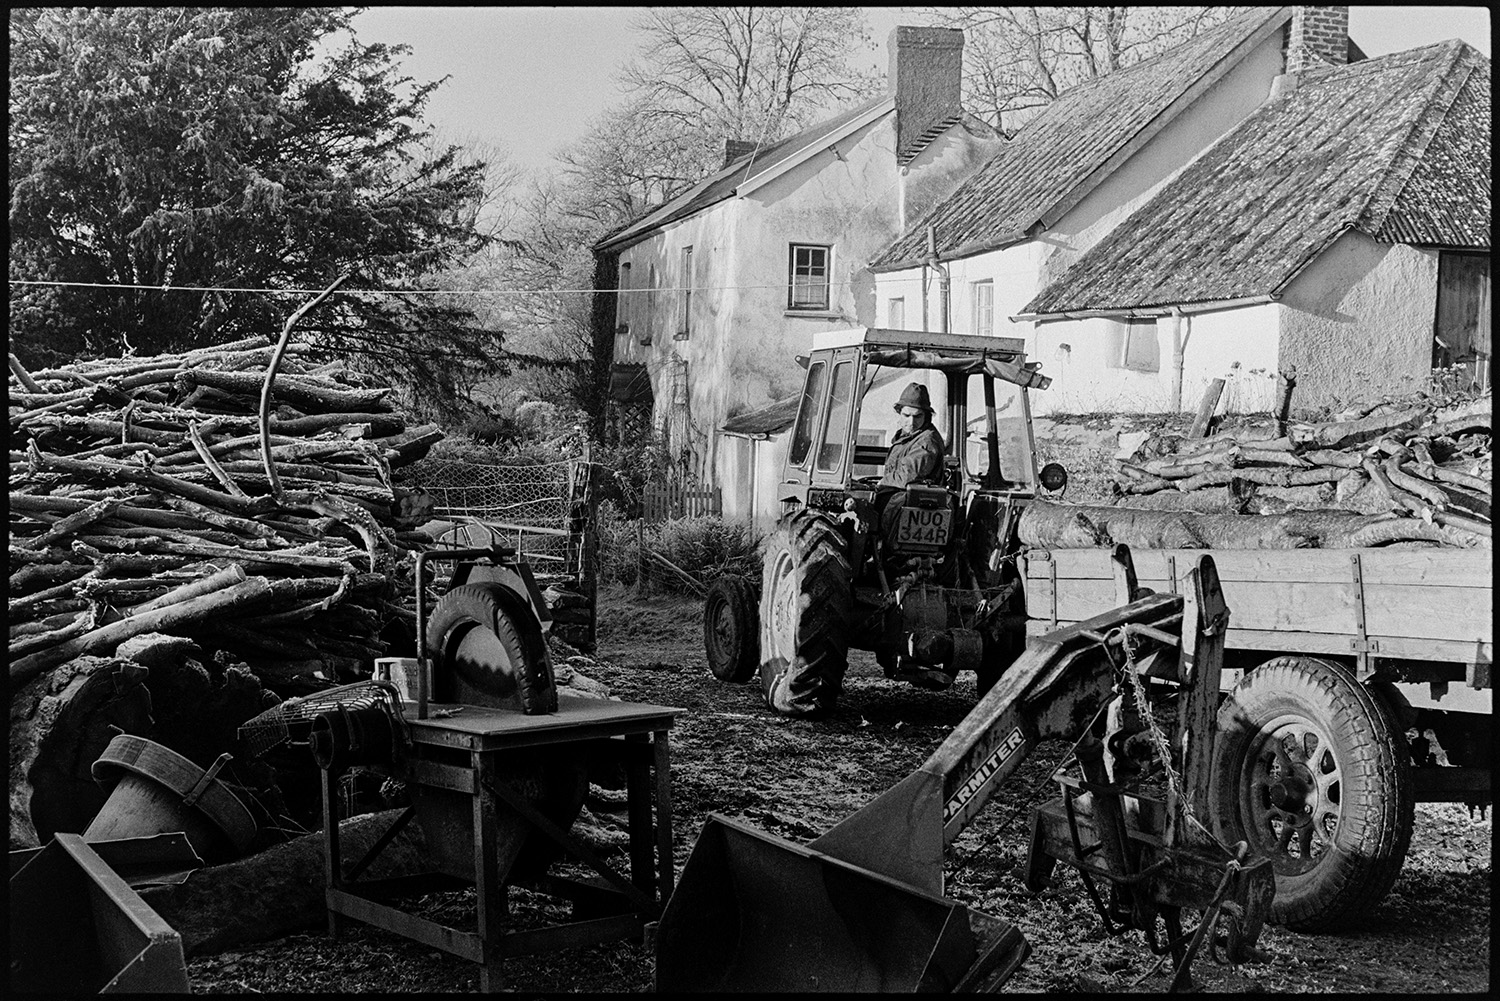 Farmer sorting logs in farmyard. 
[Stephen Squire driving a tractor pulling a trailer full of logs past the farmhouse at Lower Langham, Dolton. A woodpile and circular saw, covered with a tyre, can be seen in the farmyard.]